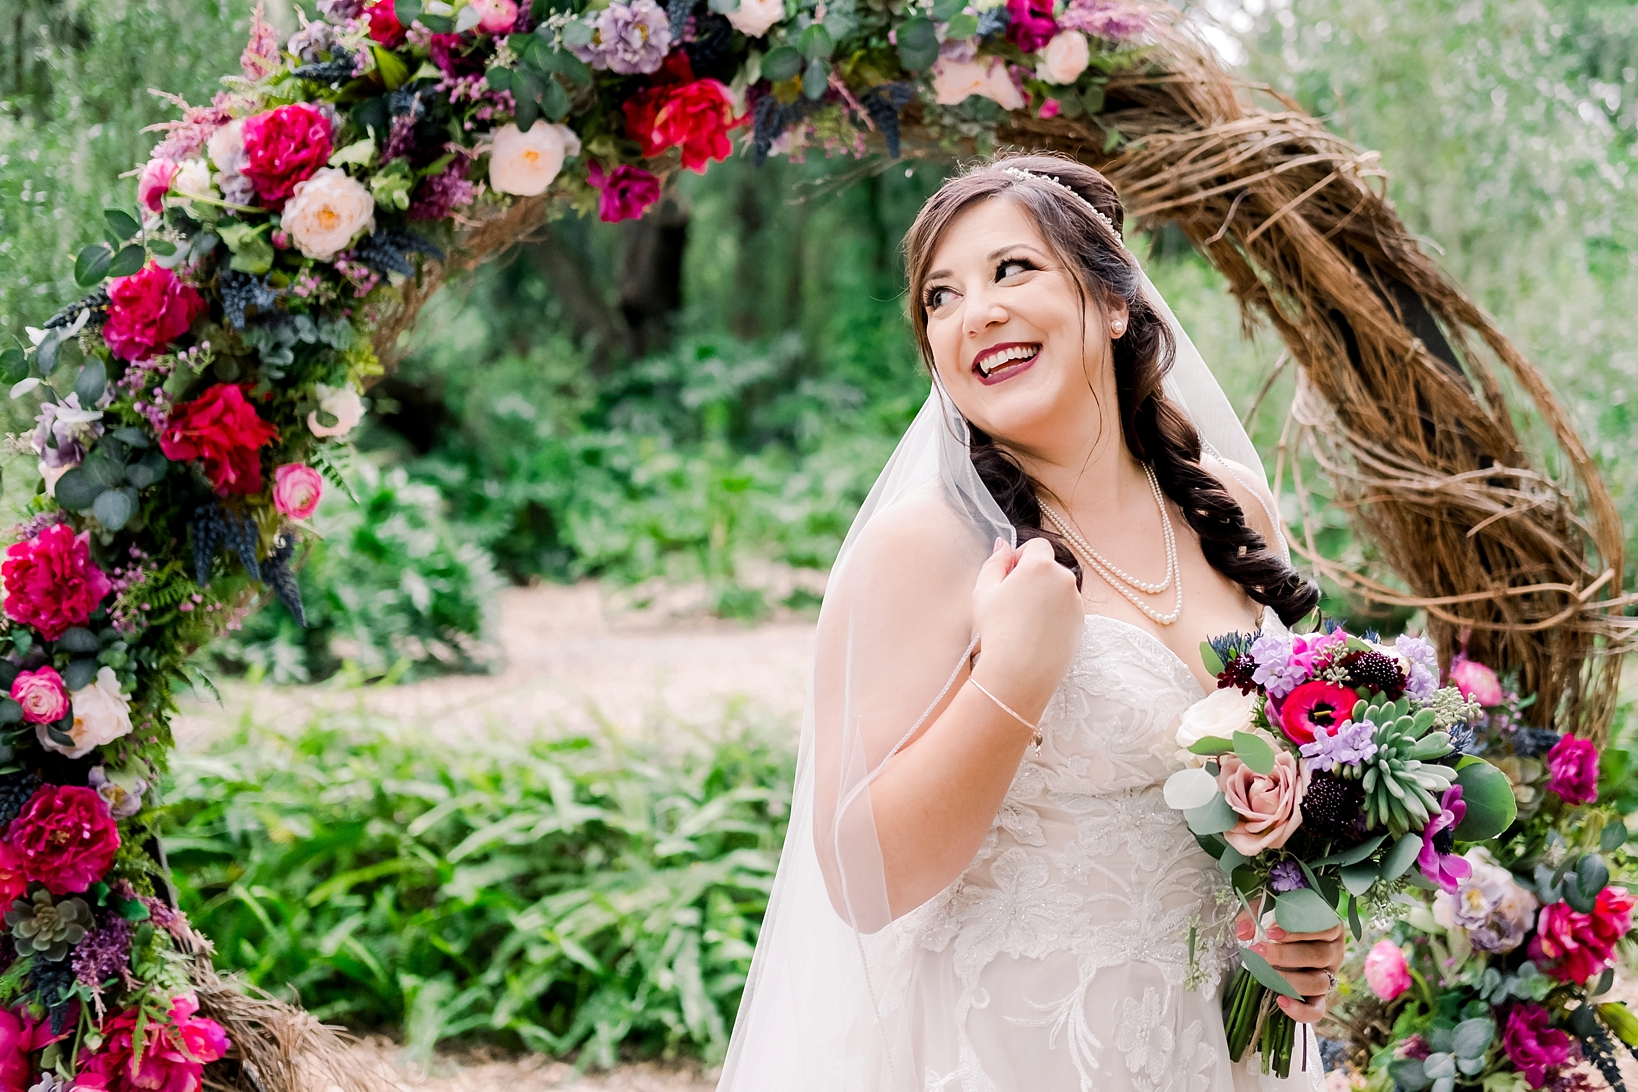 Bride poses for a formal portrait in front of her large floral altar while pinching her veil